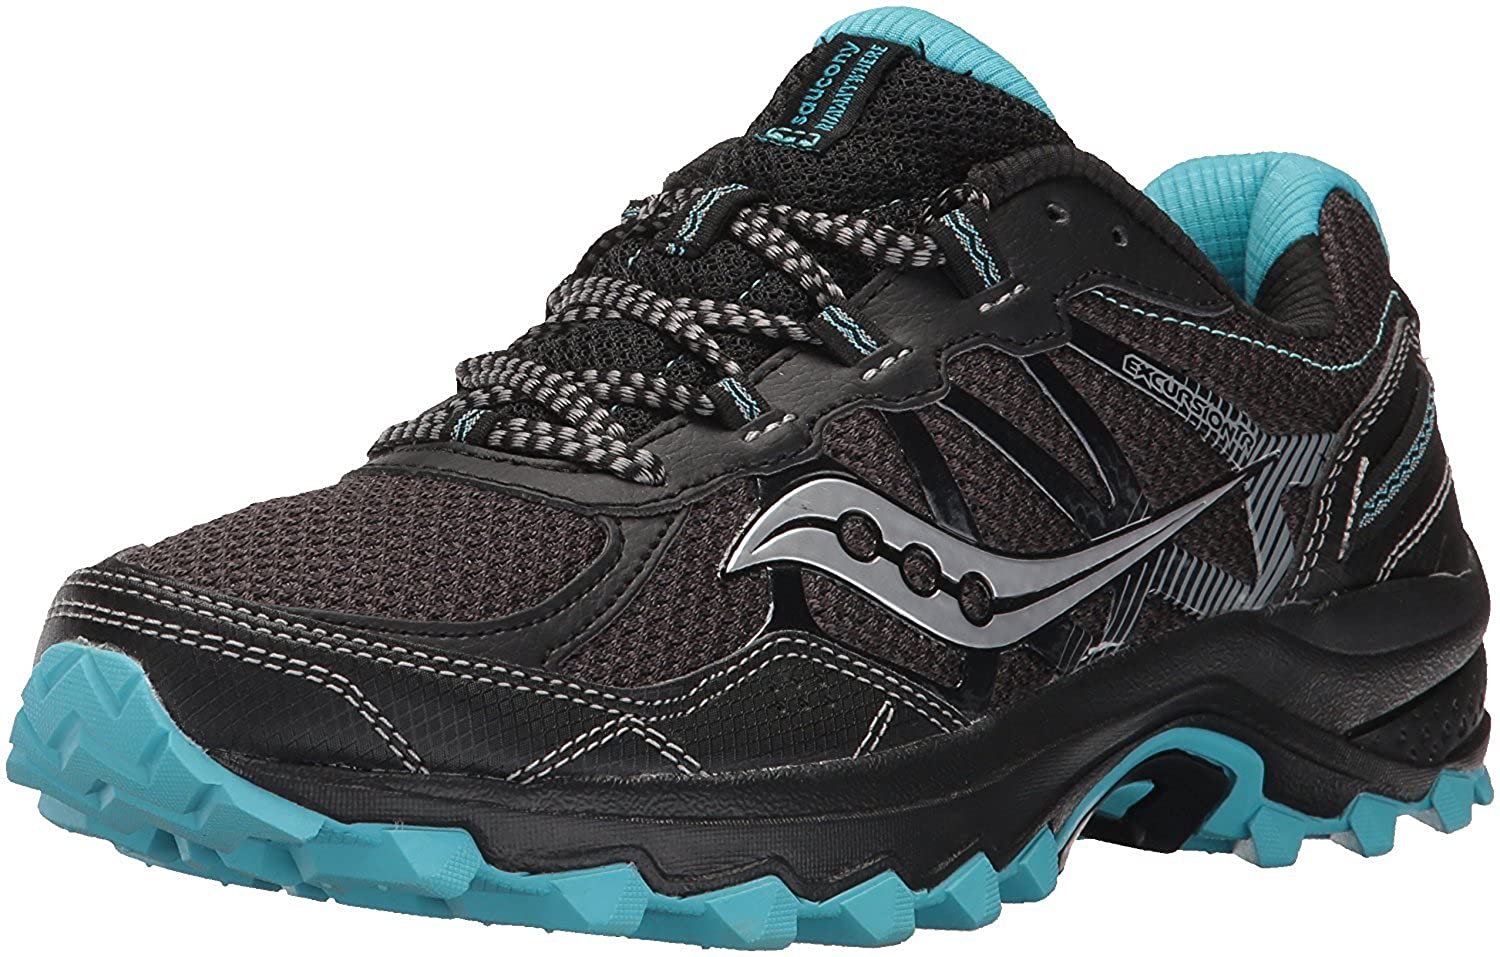 Review of Women's Excursion Tr11 Running Shoe